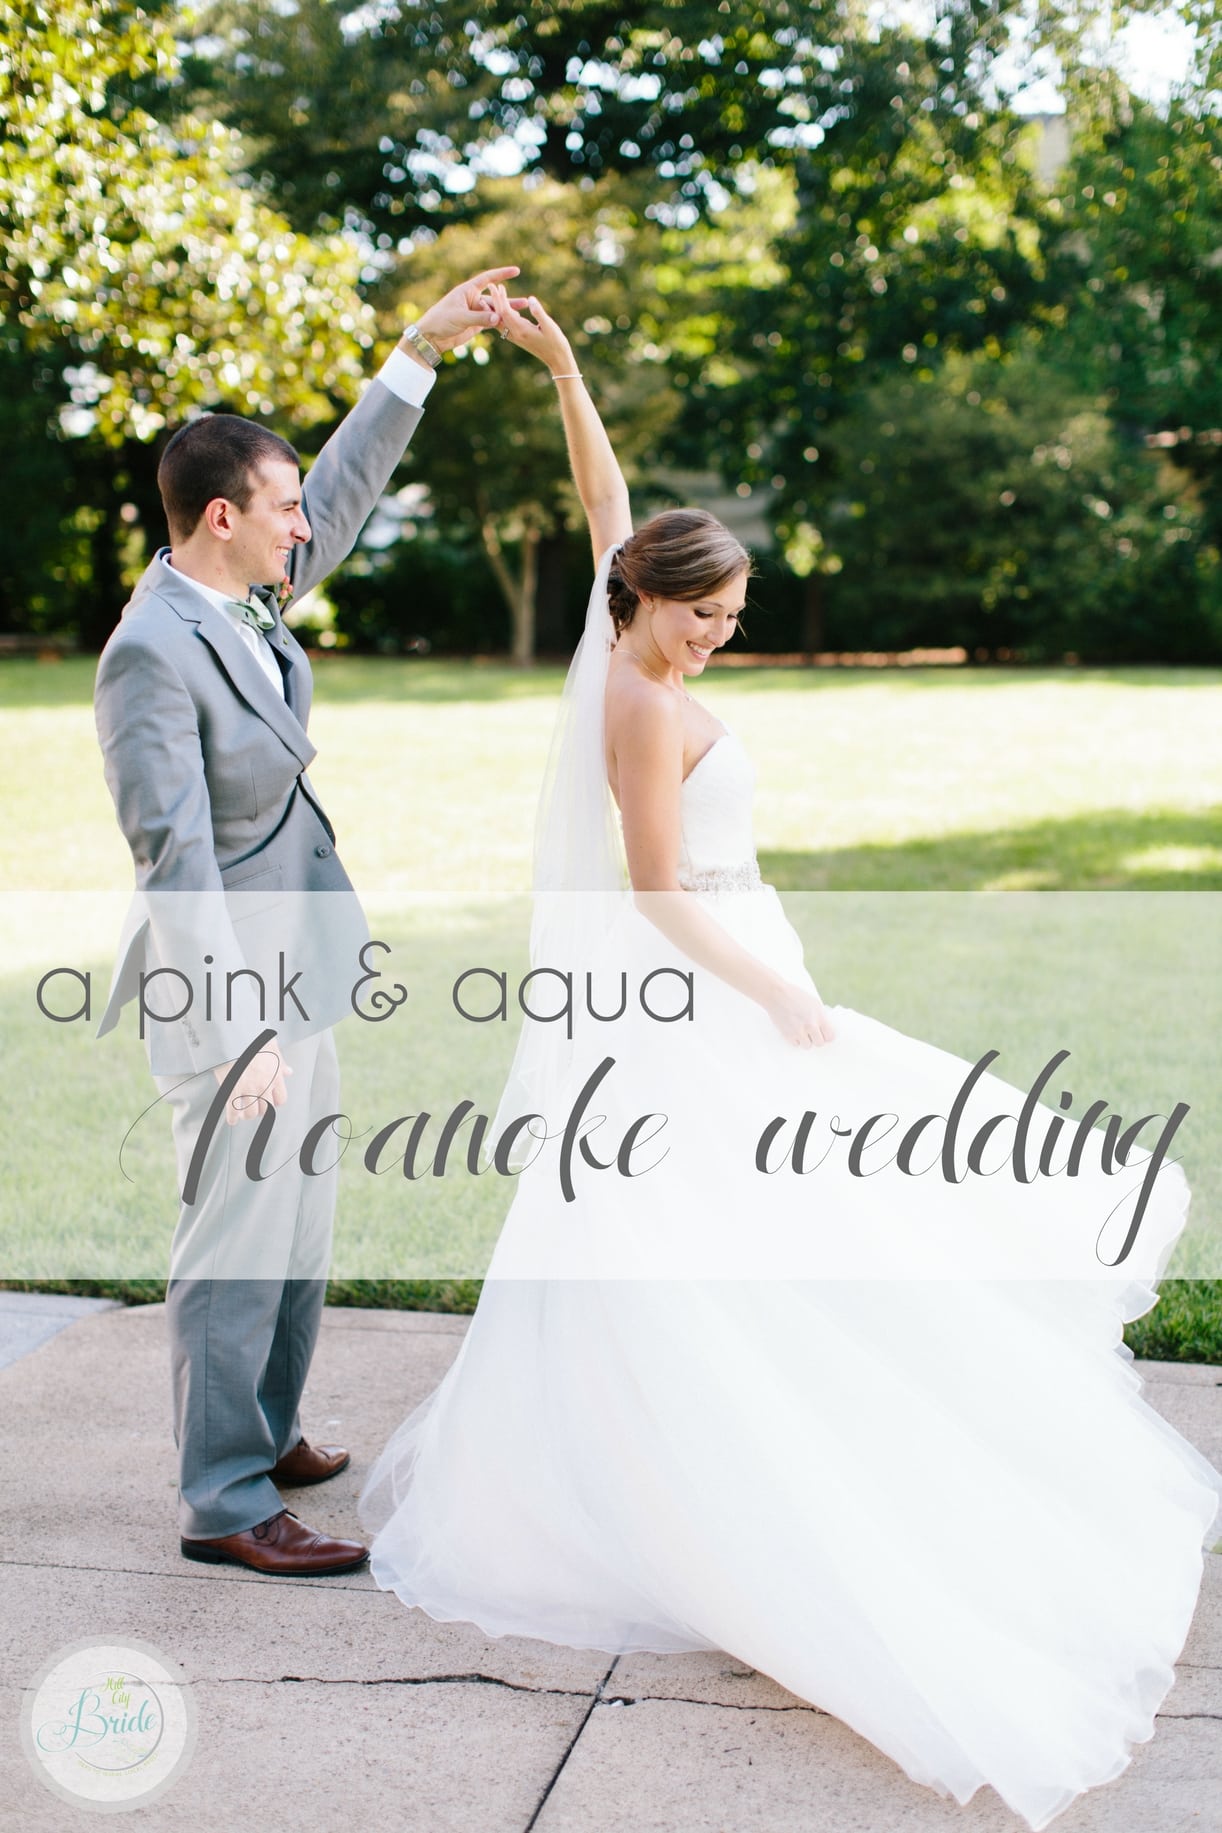 A Pink and Aqua Roanoke Virginia Wedding as seen on Hill City Bride Blog and Magazine